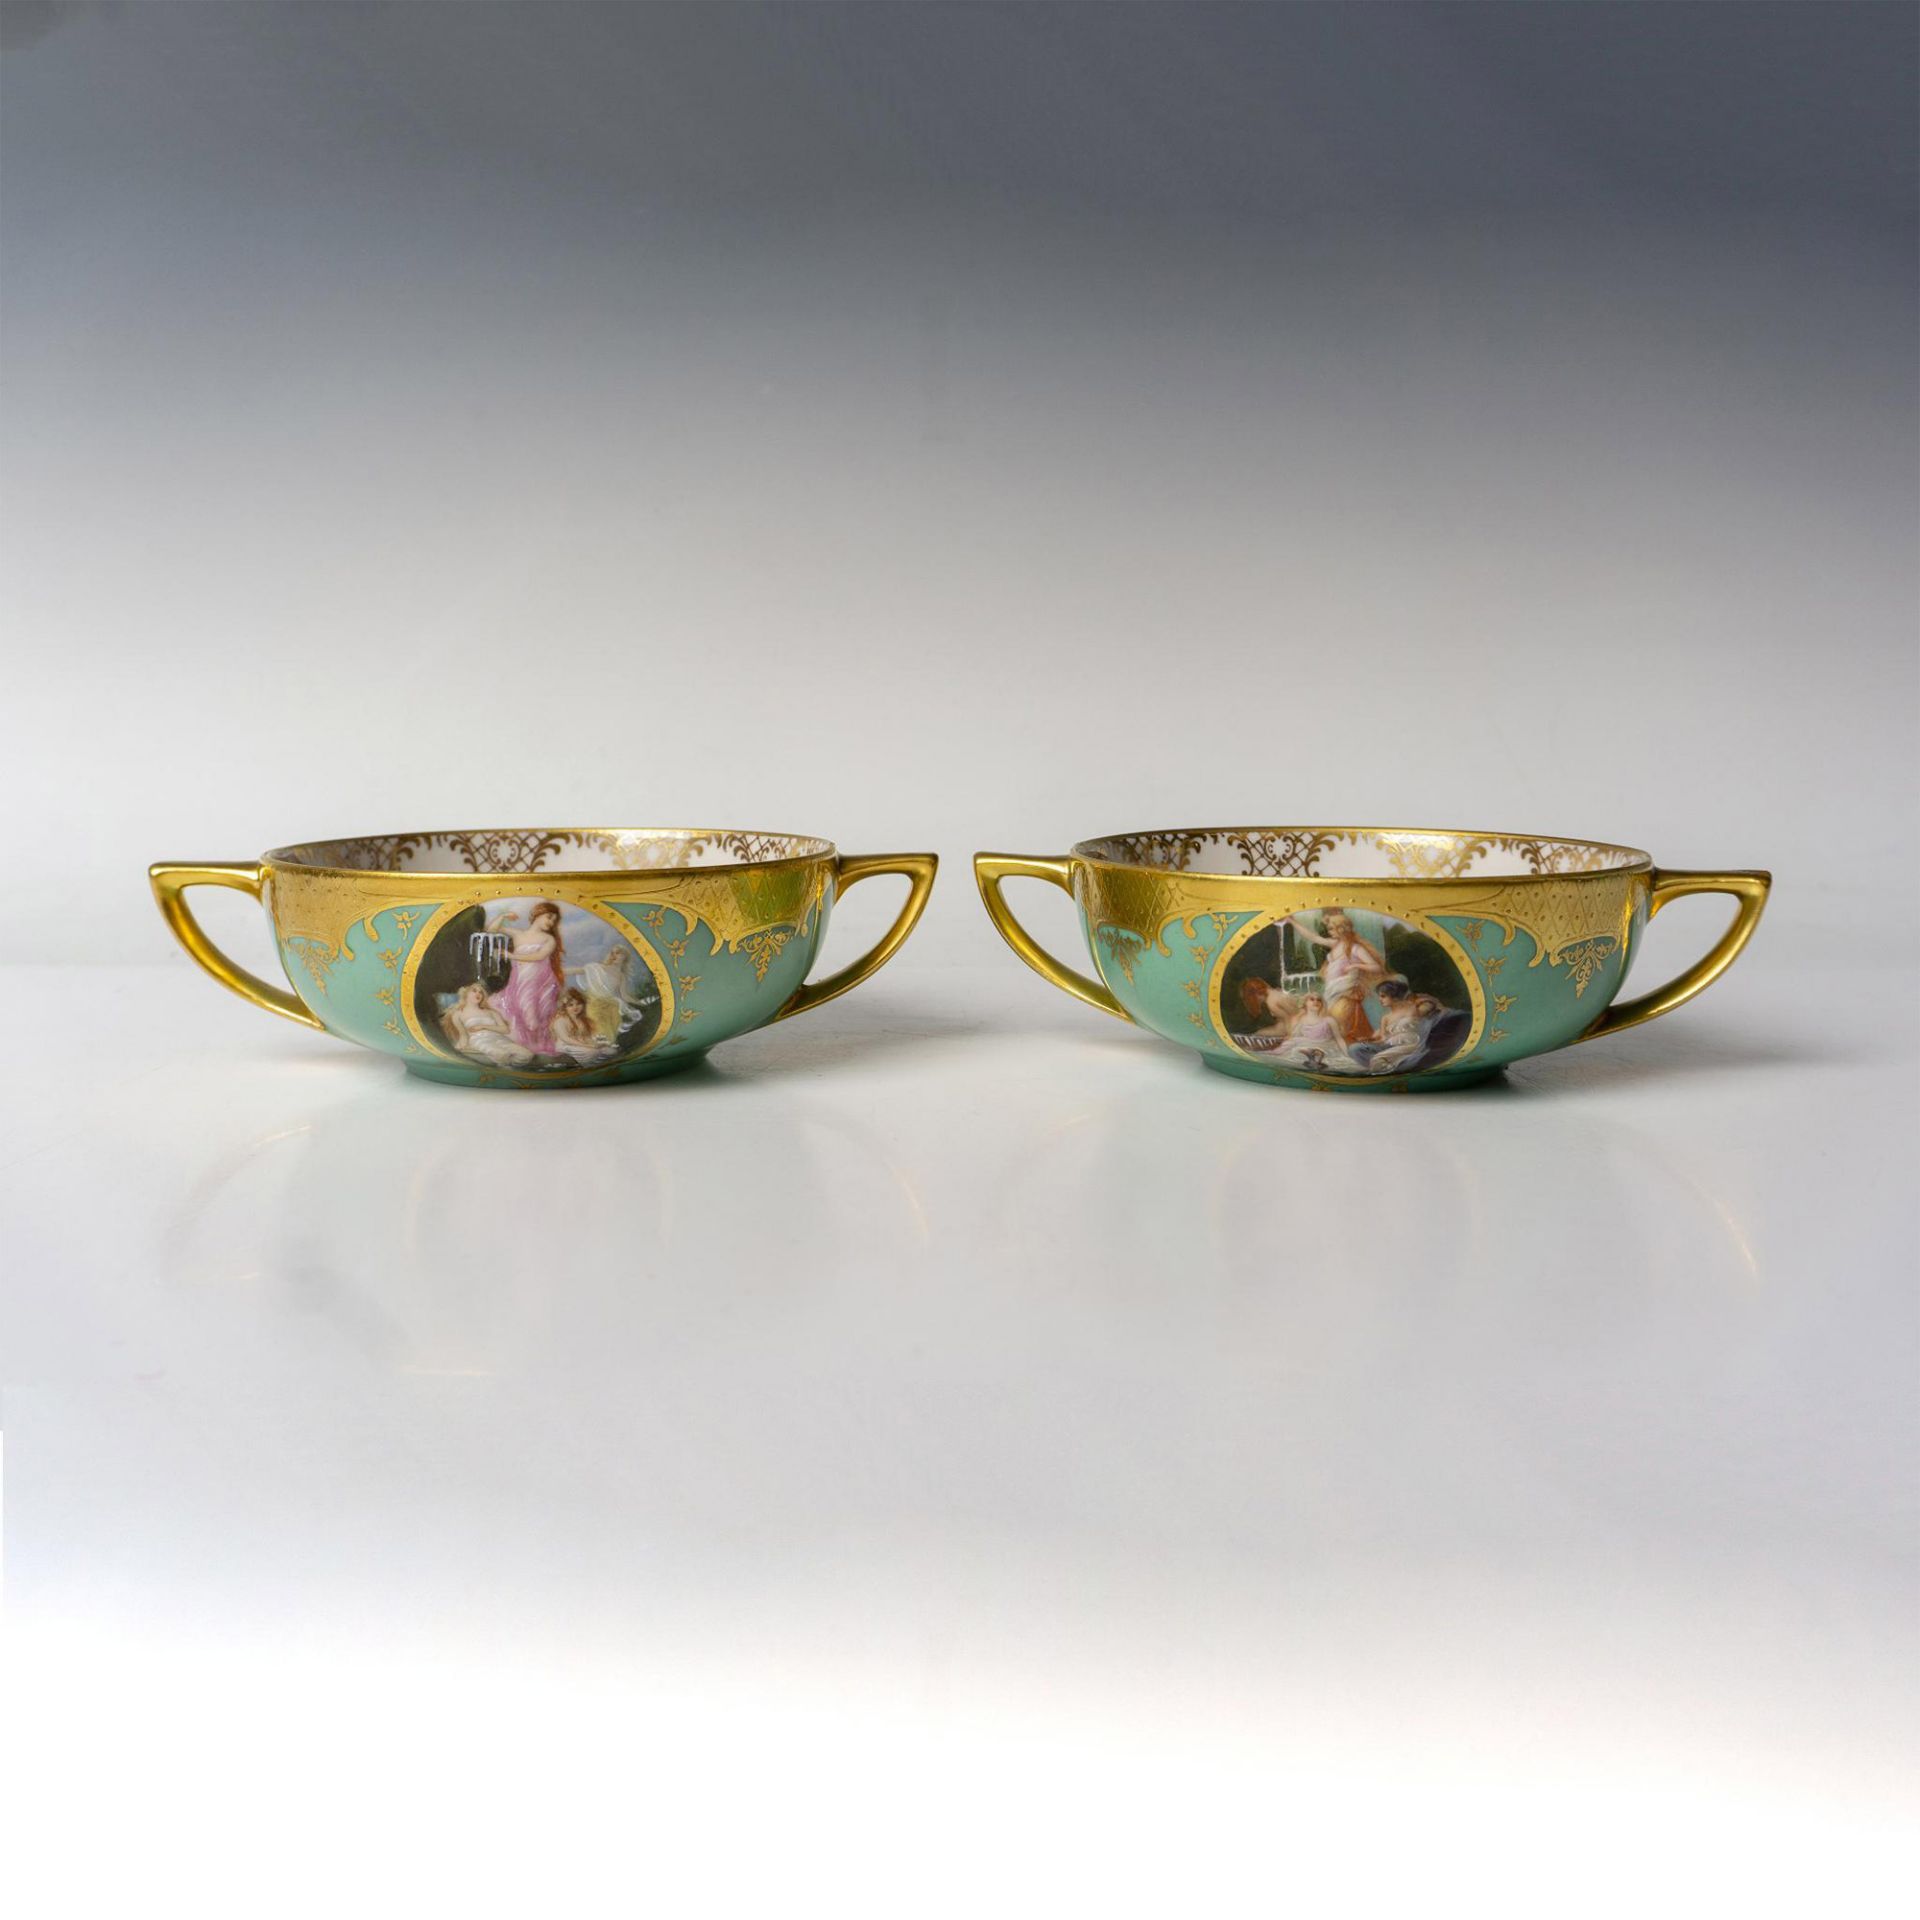 Pair of Karlsbad Czechoslovakia Porcelain Soup Bowls - Image 3 of 3